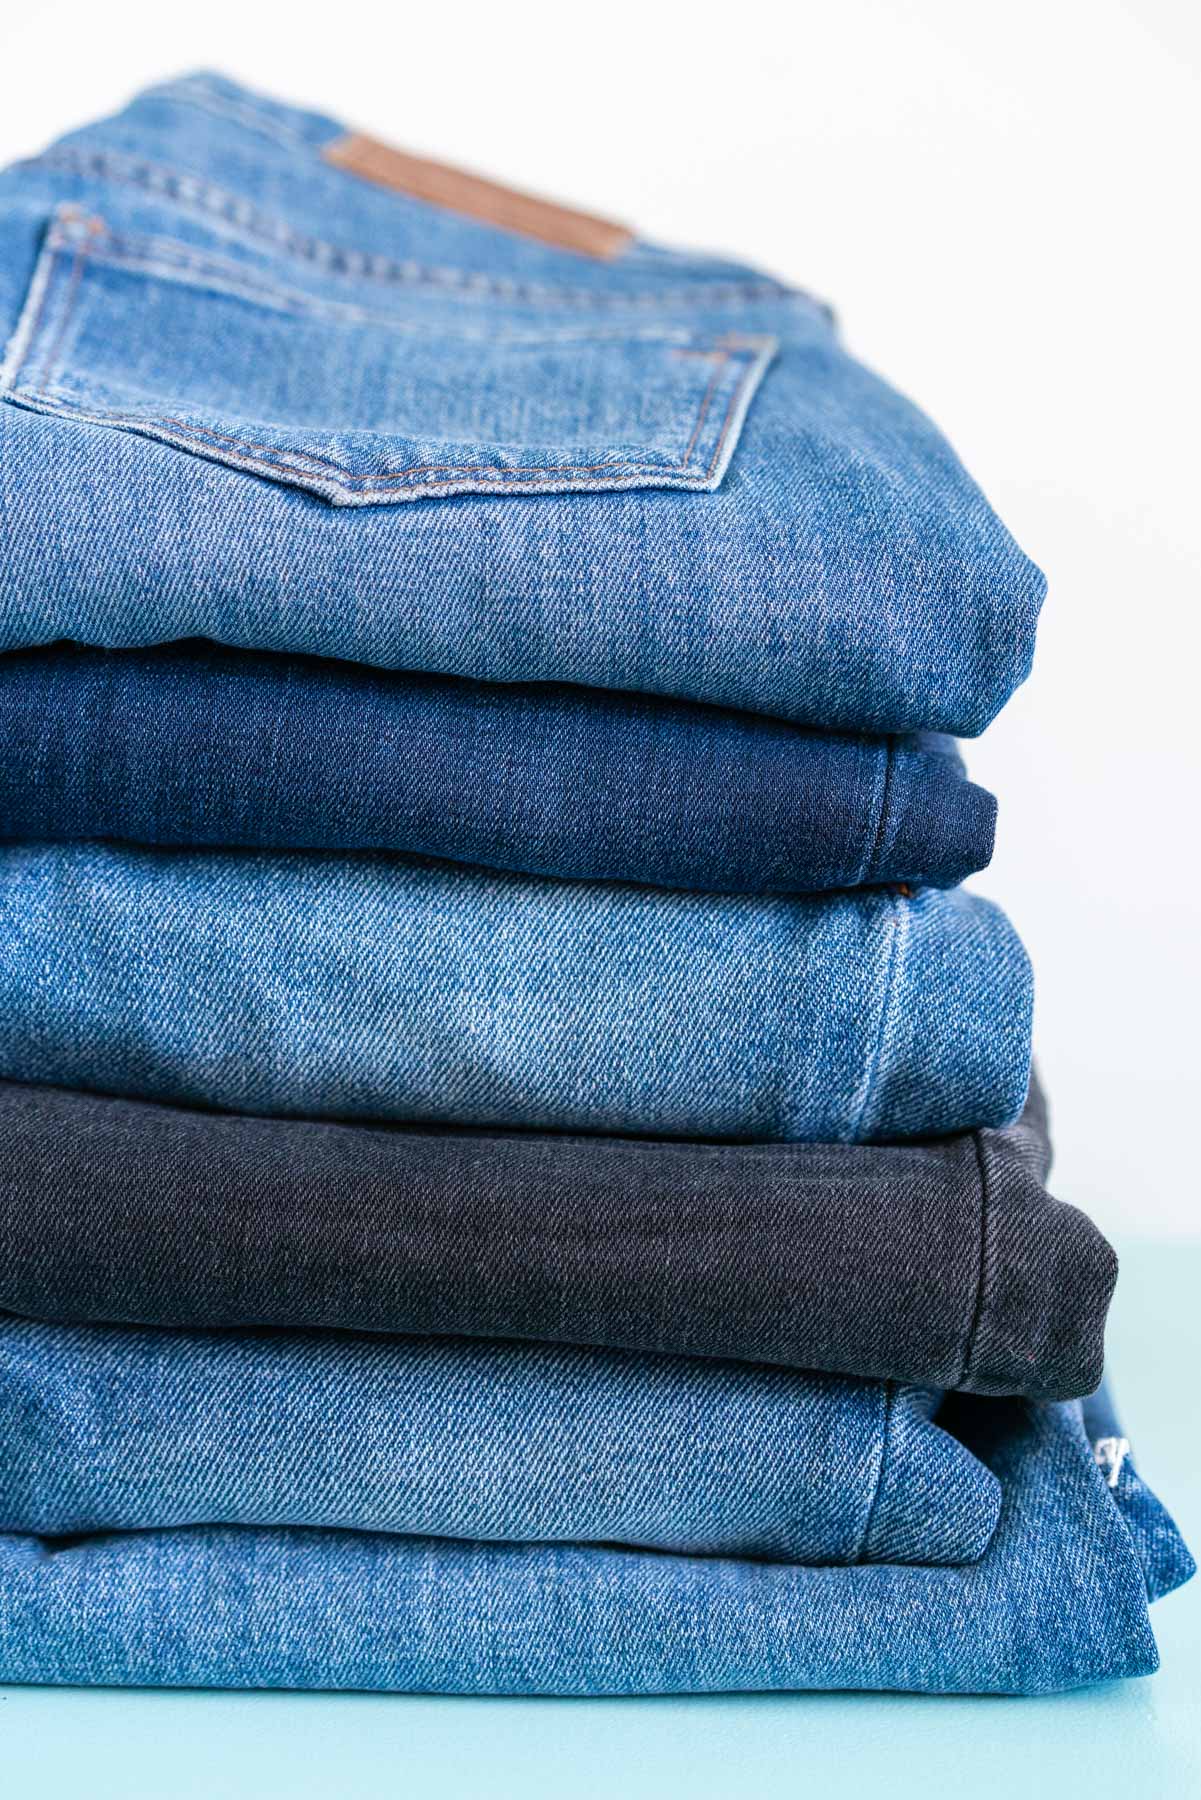 A pile of 6 pairs of Madewell denim jeans in various washes